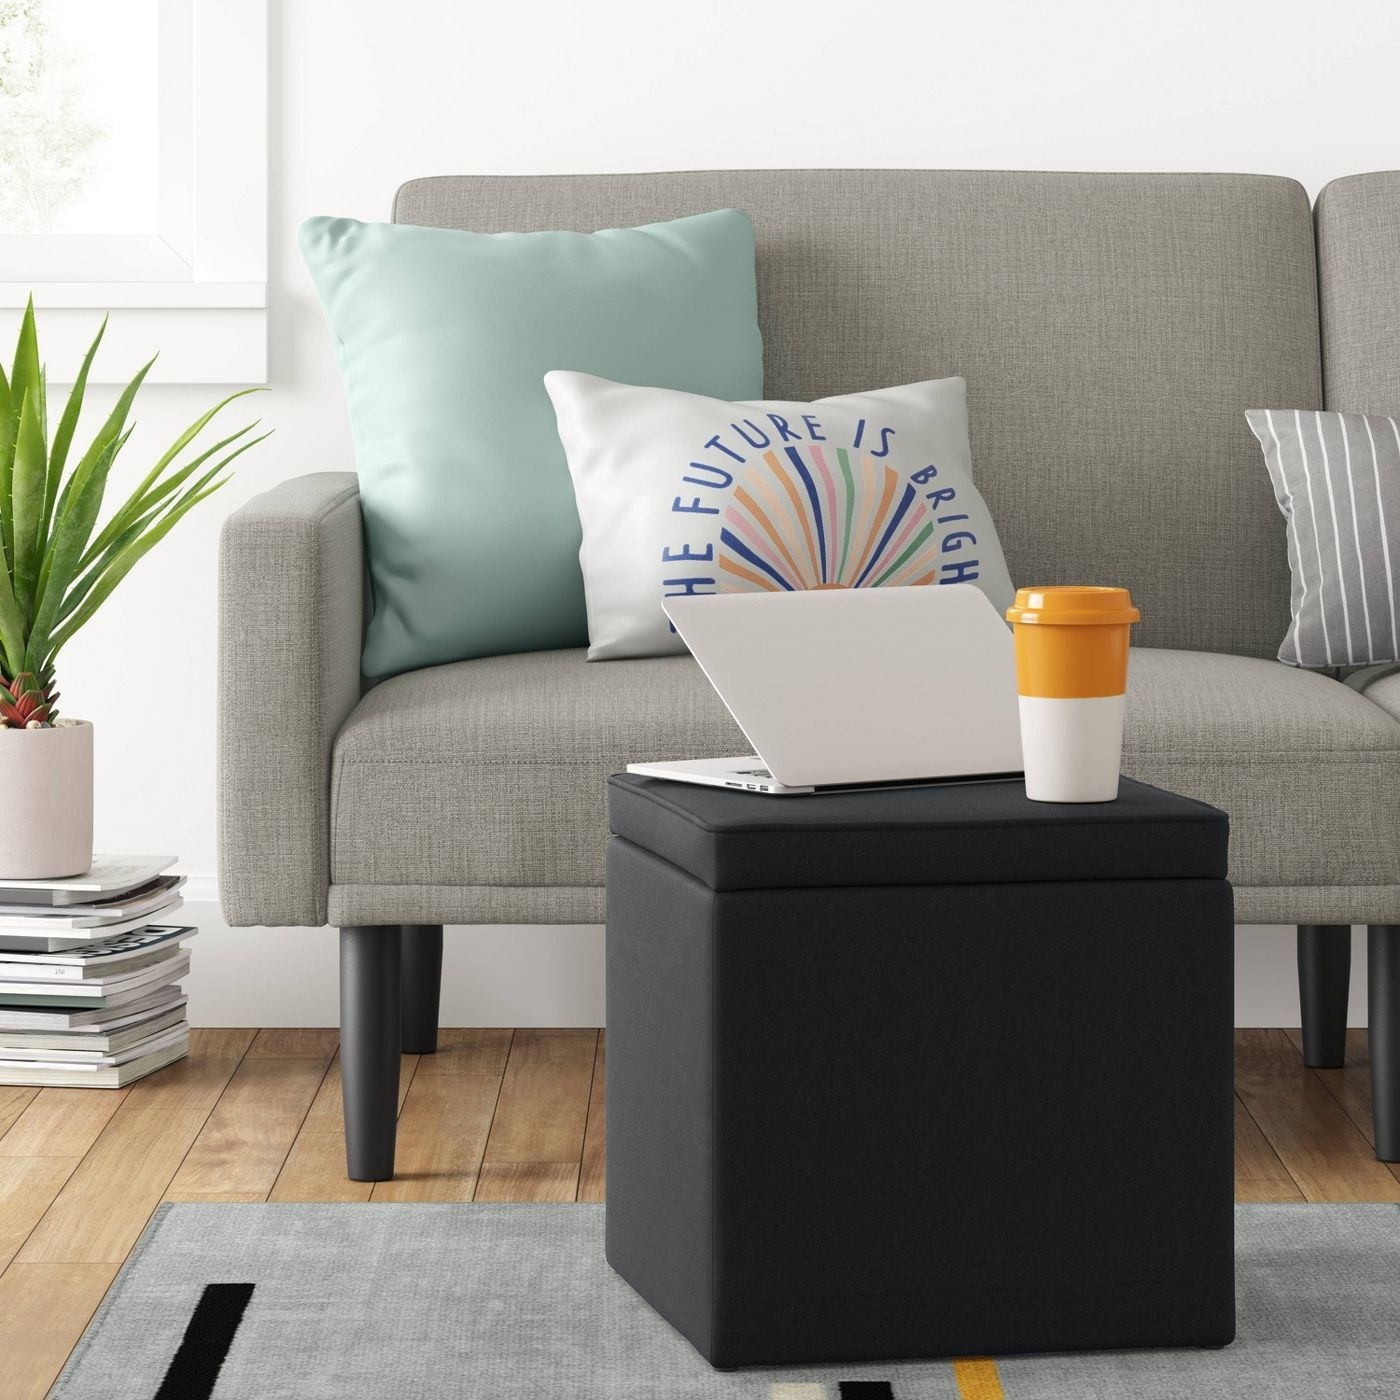 a black ottoman in a living room with a laptop and coffee tumbler on top